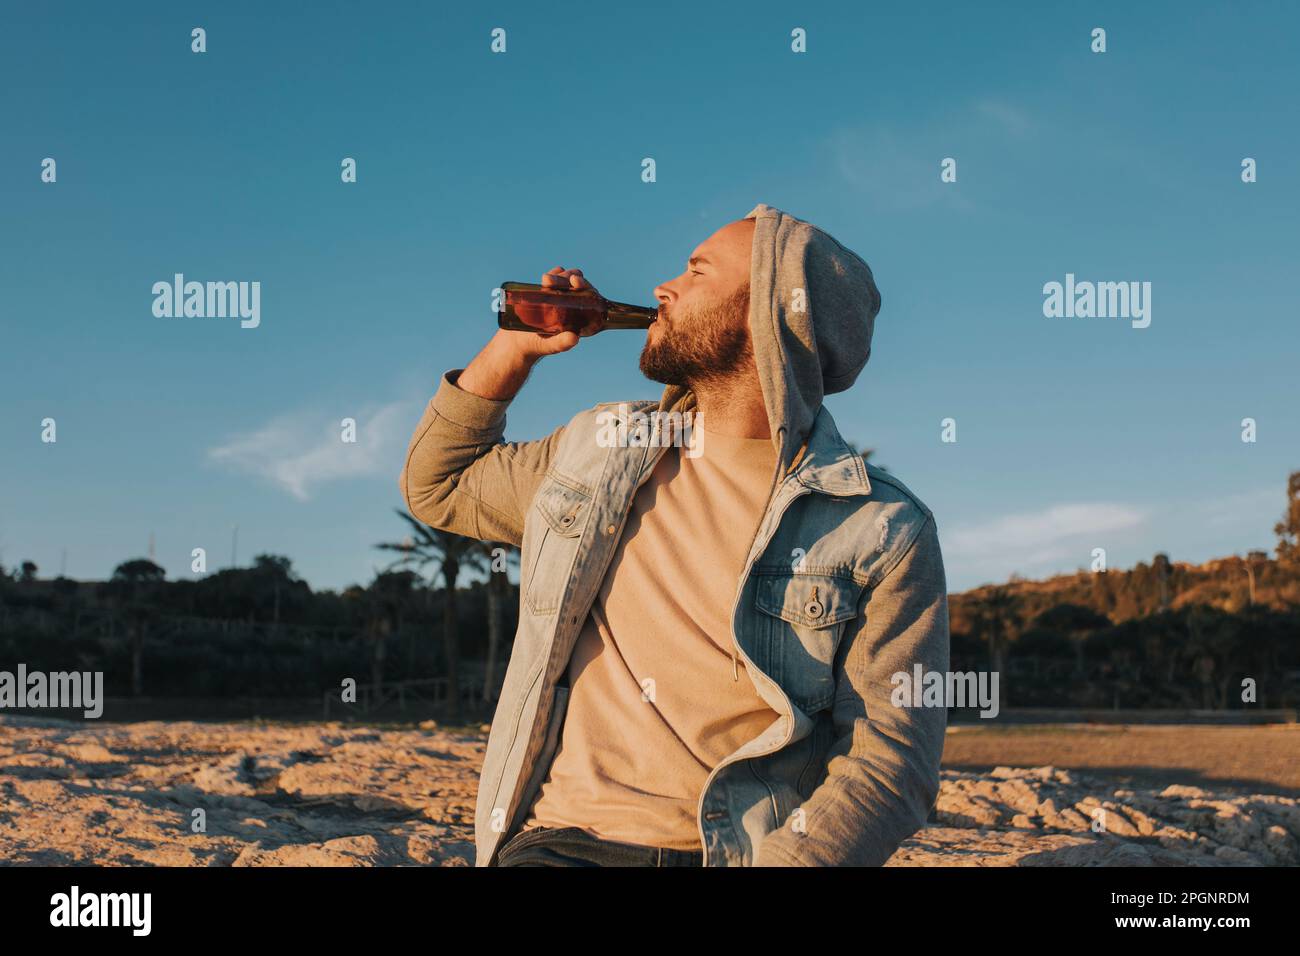 Man drinking beer at sunset under sky Stock Photo